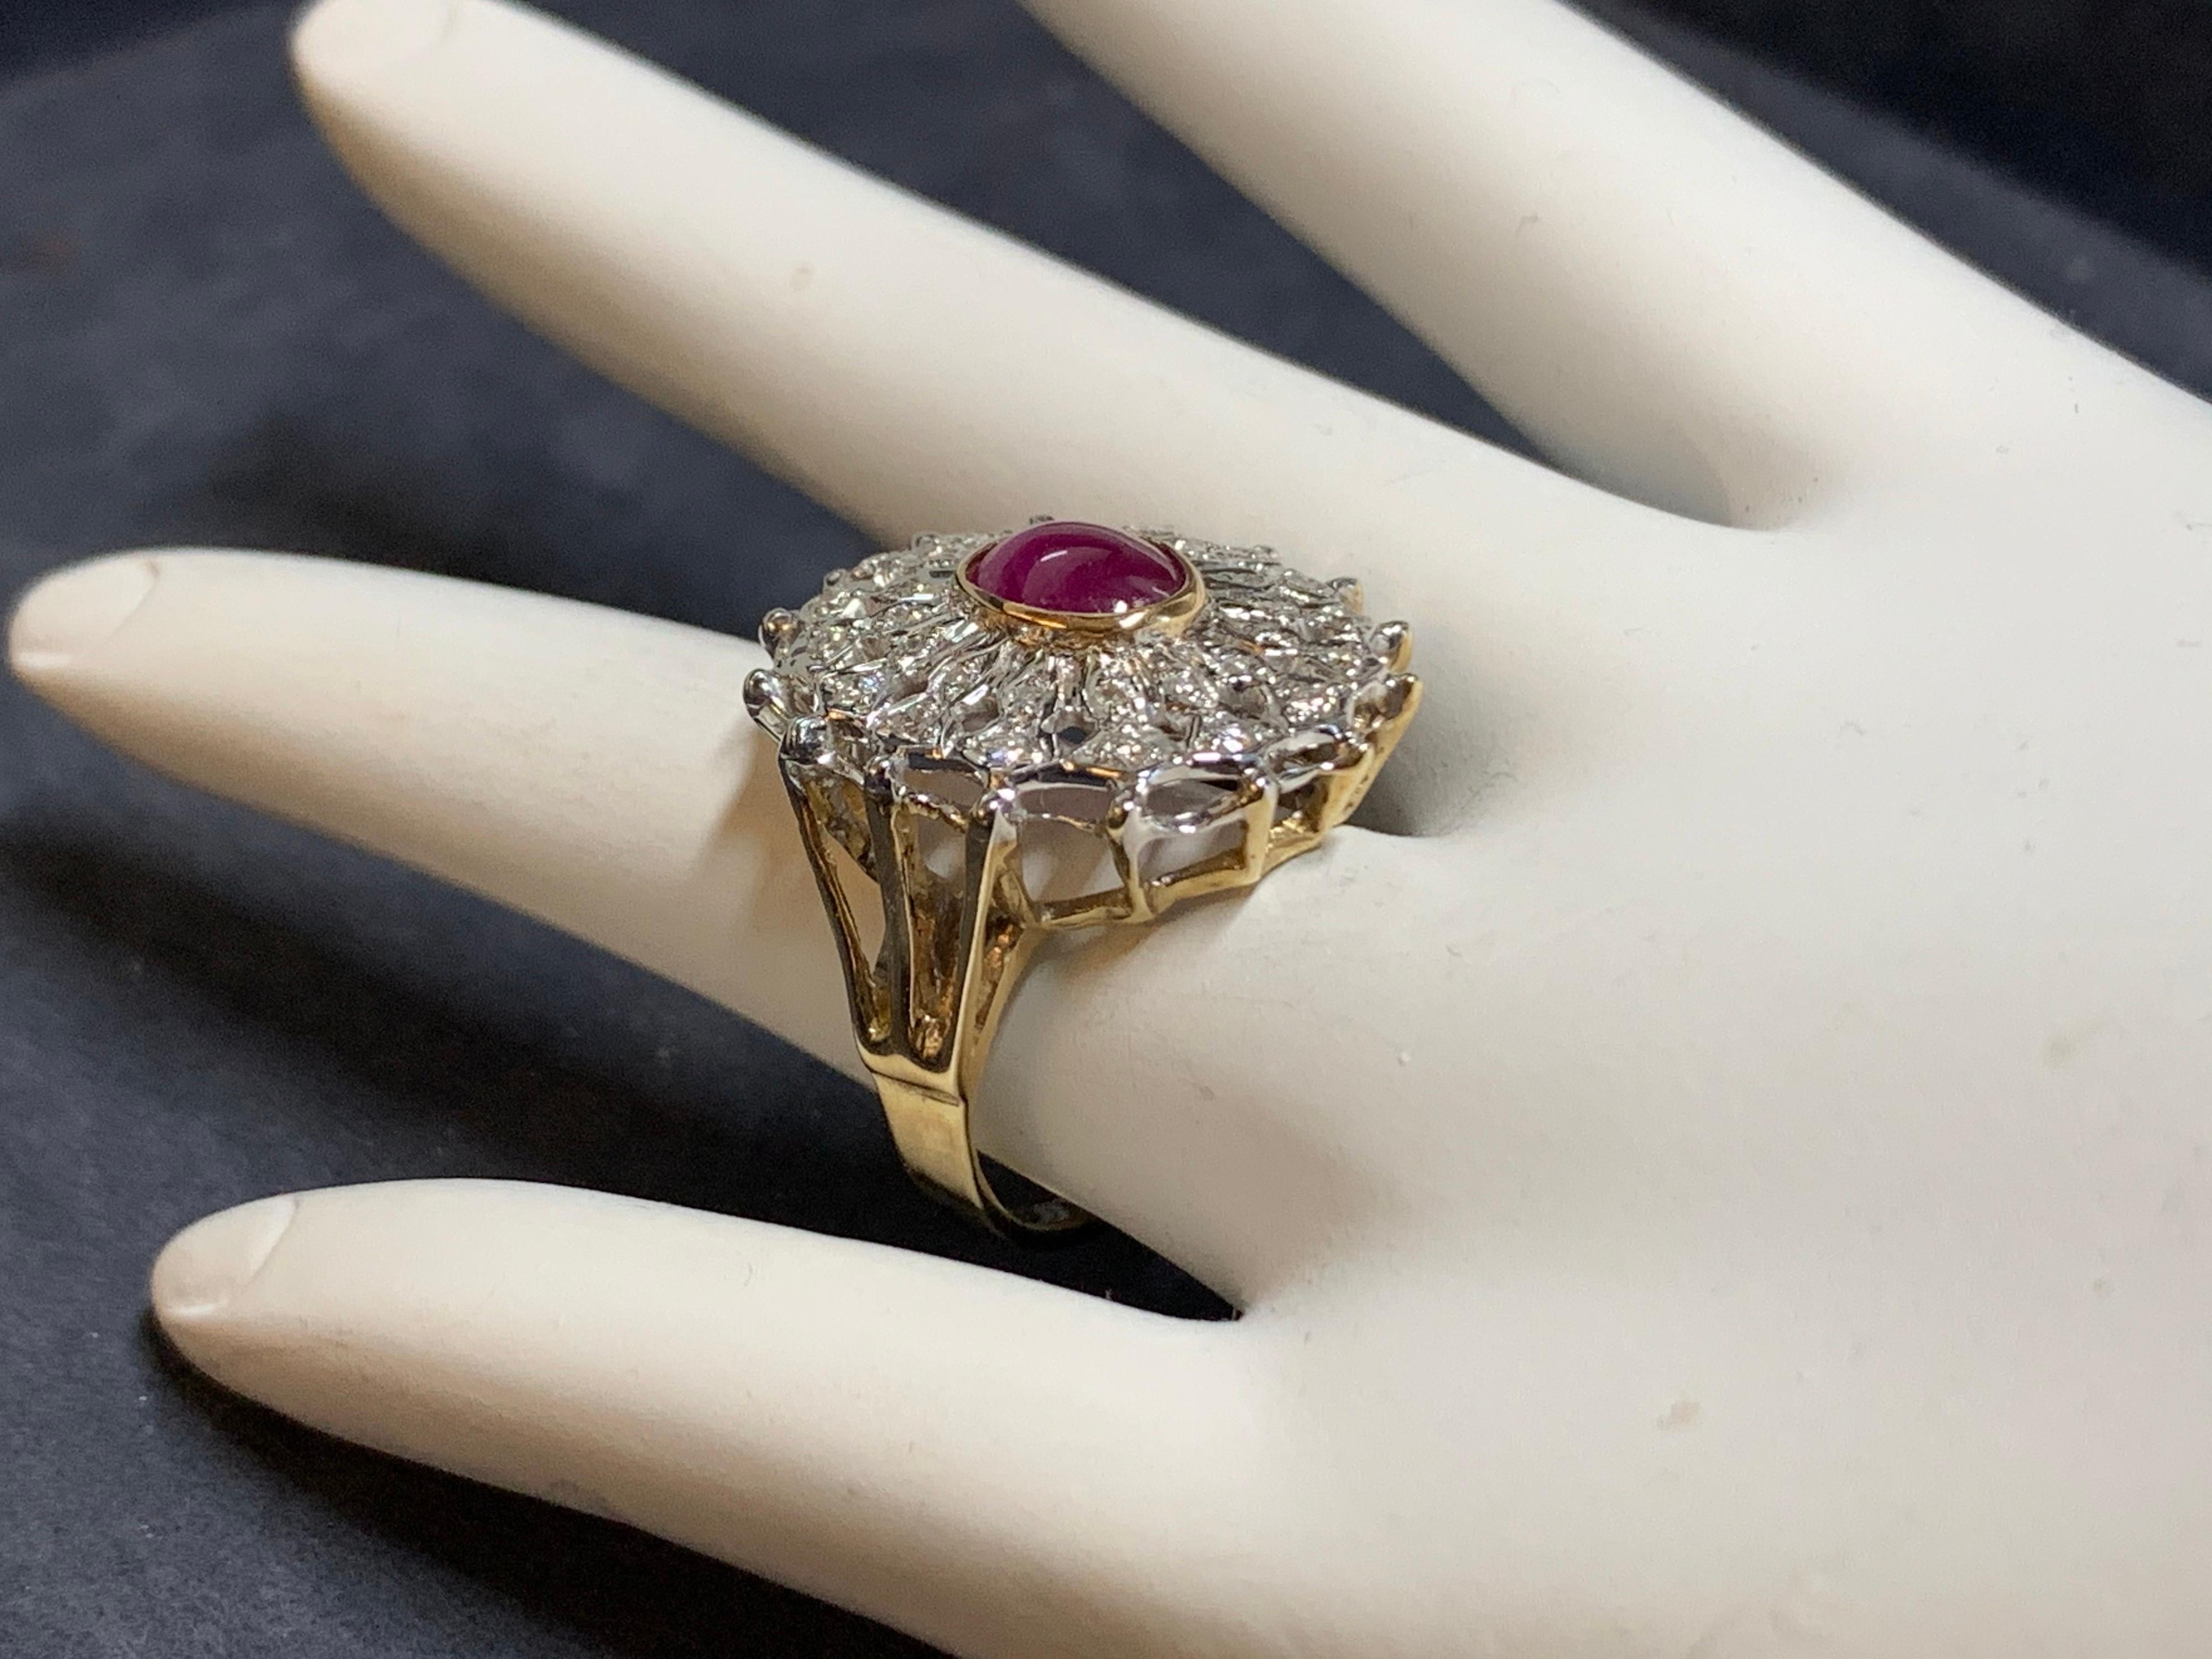 Retro Gold Cocktail Ring 2.40 Carat Natural Cabochon Ruby and Diamond circa 1960 For Sale 5